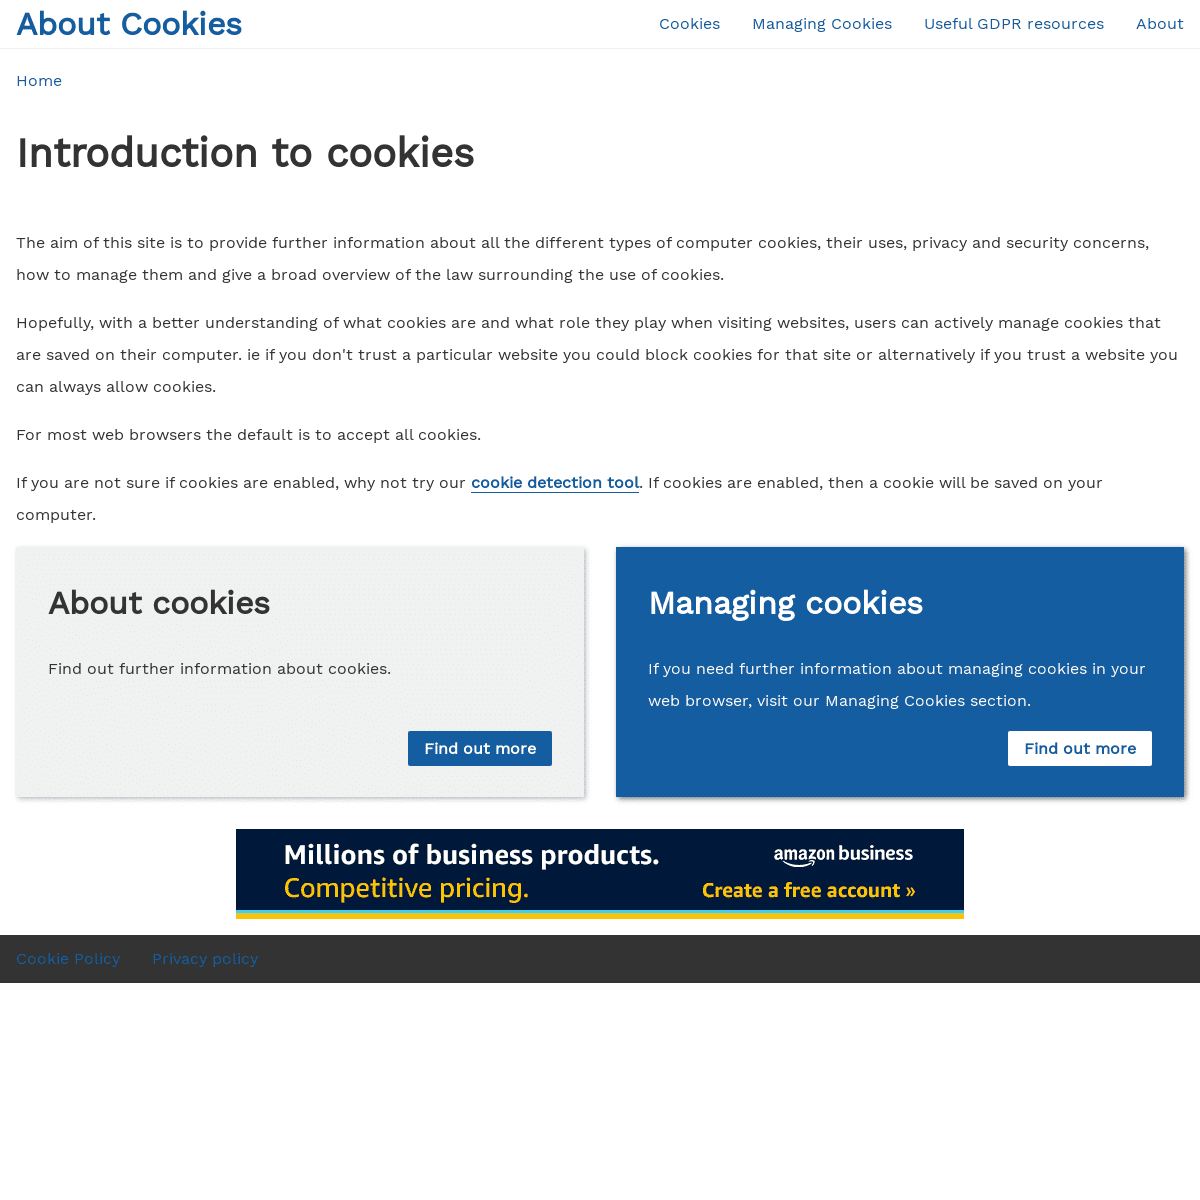 A complete backup of https://aboutcookies.org.uk